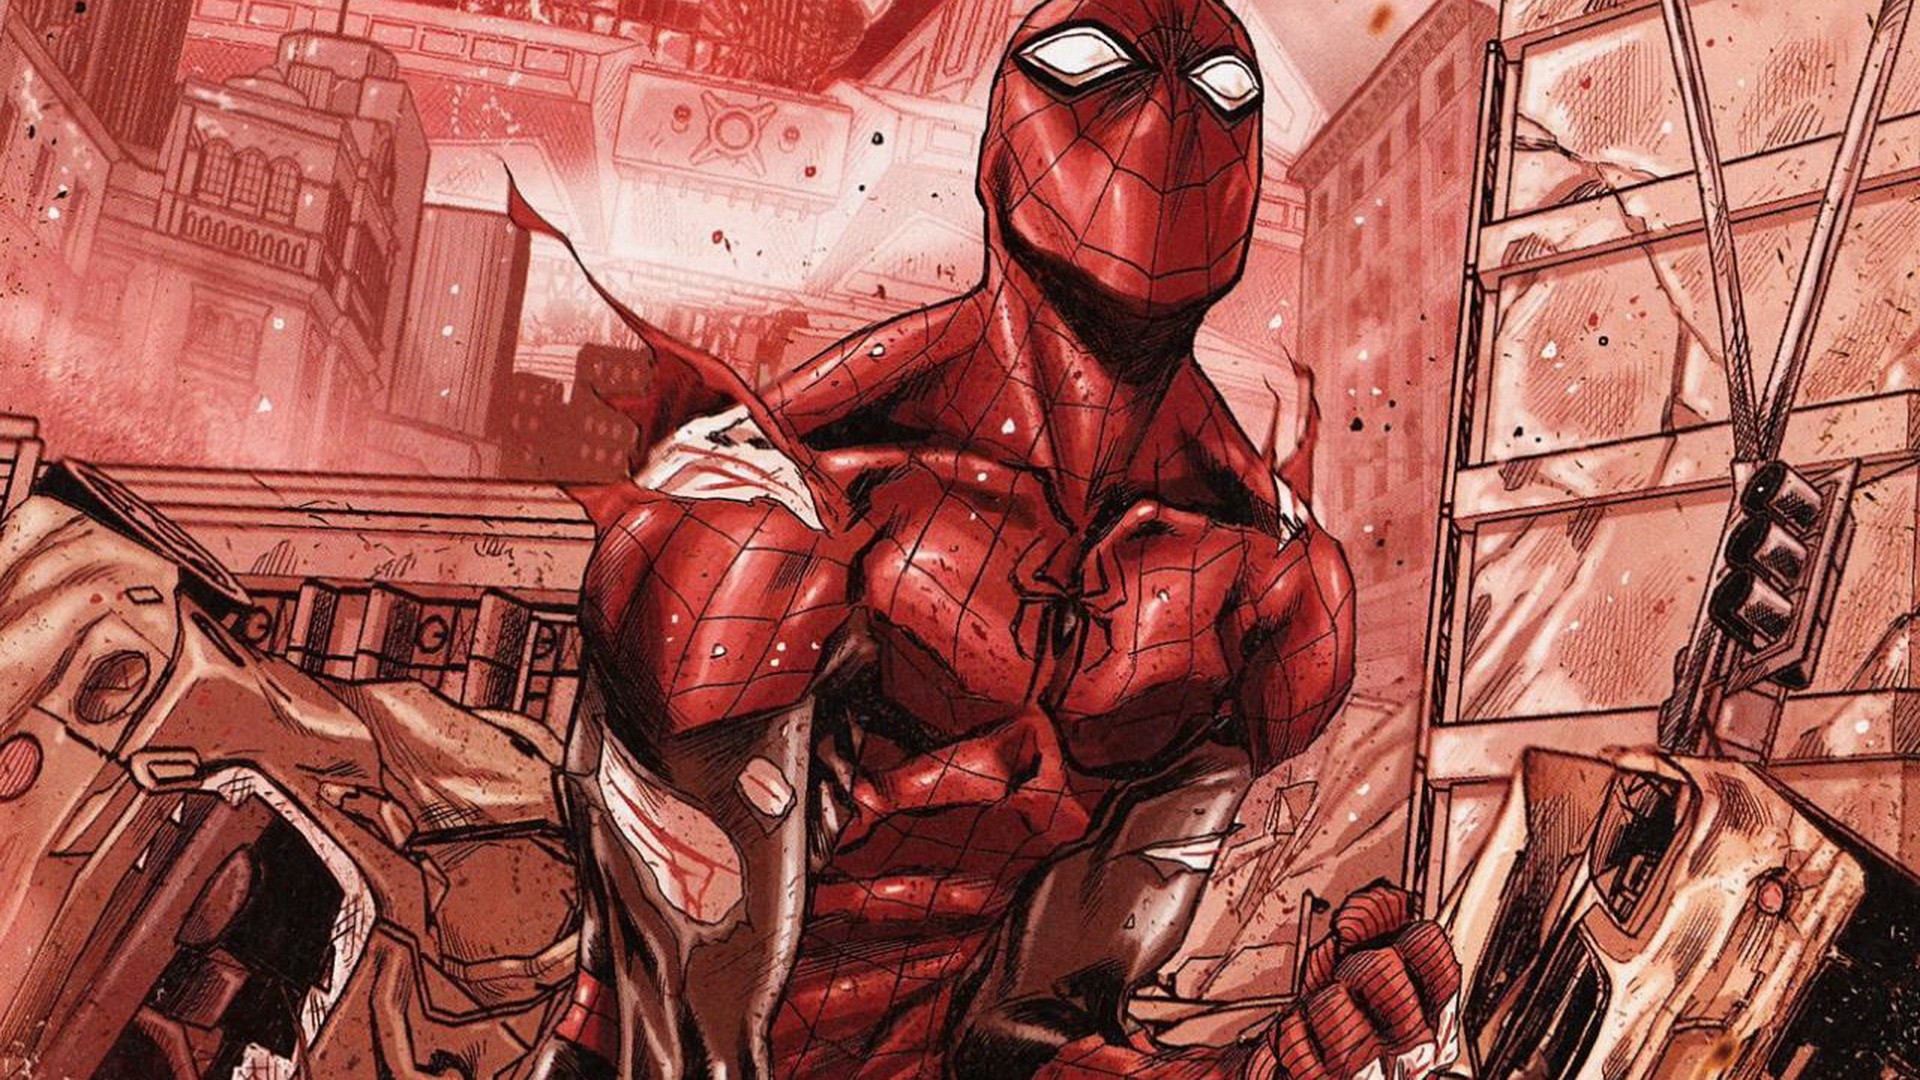 Wallpaper Wounded, dc comics, spider man